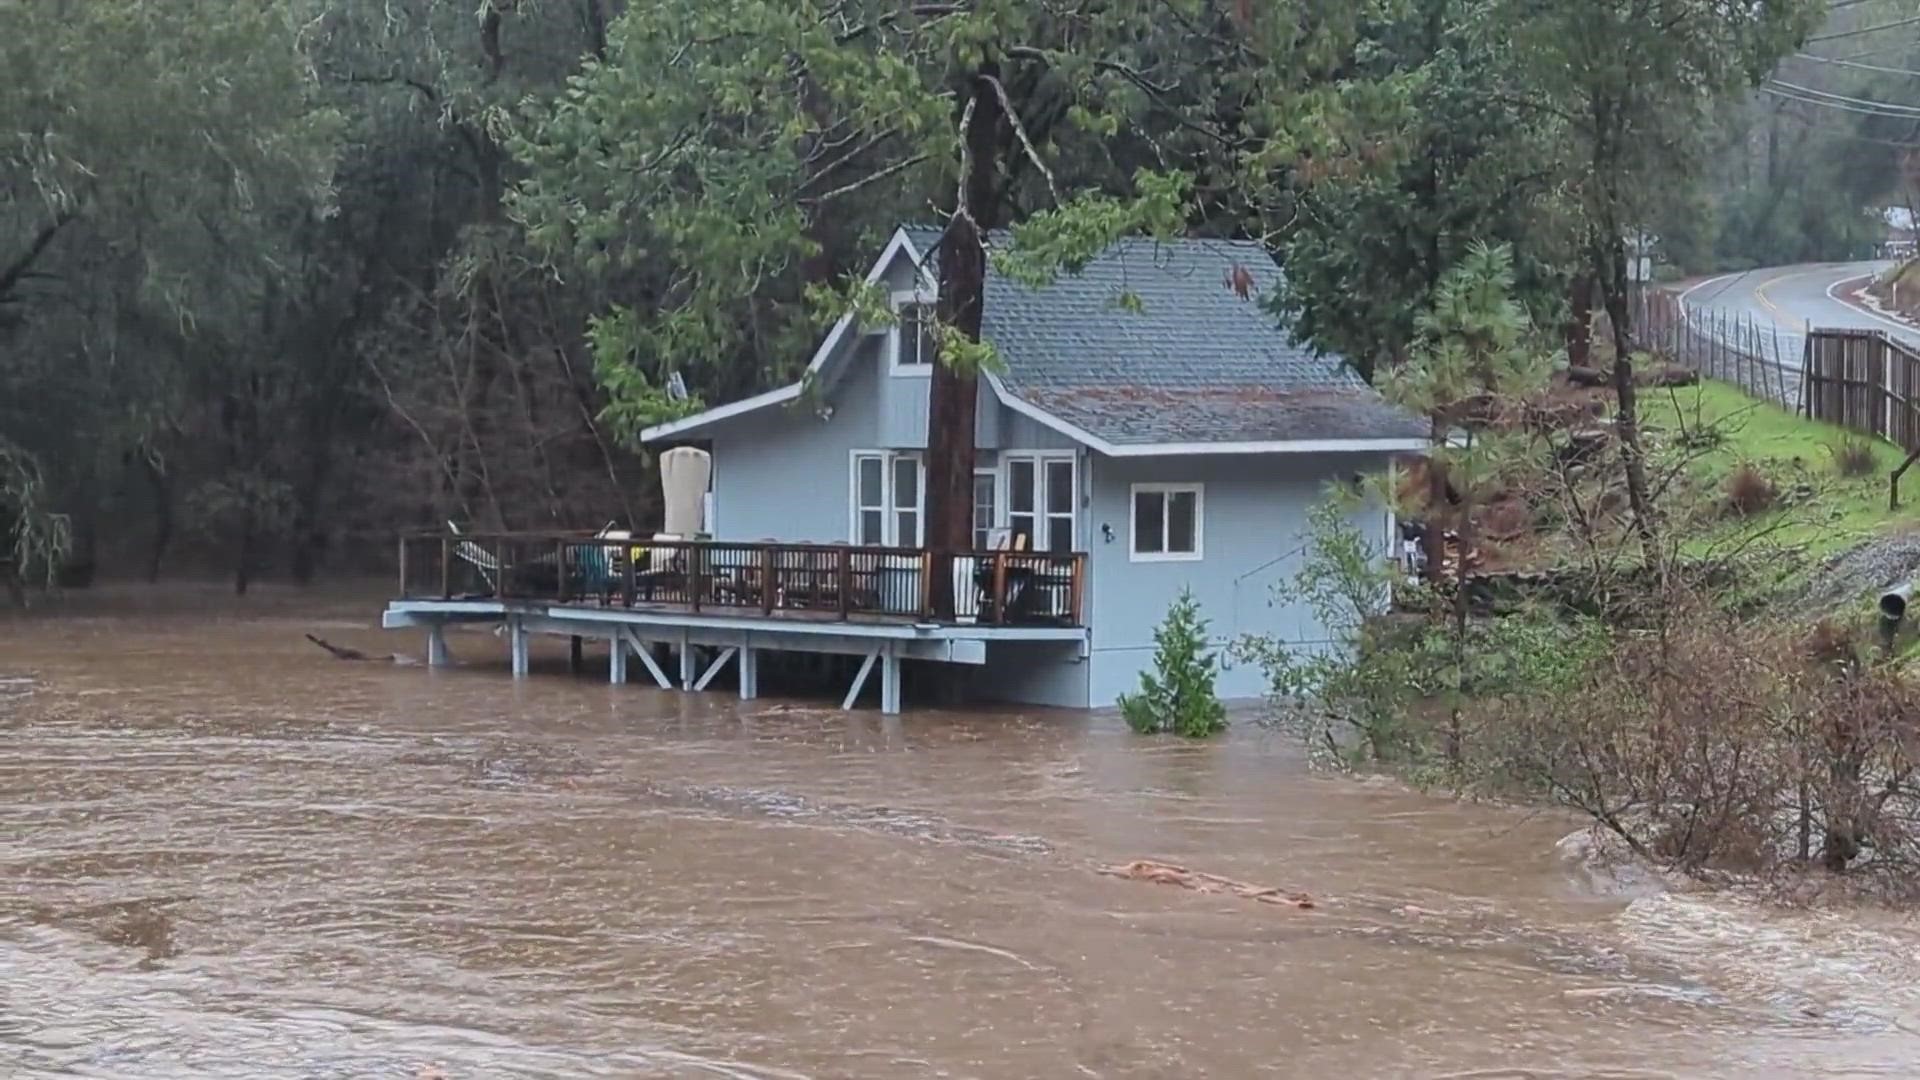 North Fork Consumes at Bucks Bar Road near Placerville. There is usually a lot more house below showing. Taken today 12/31/2022 at about 8:30 AM
Credit: David Malan